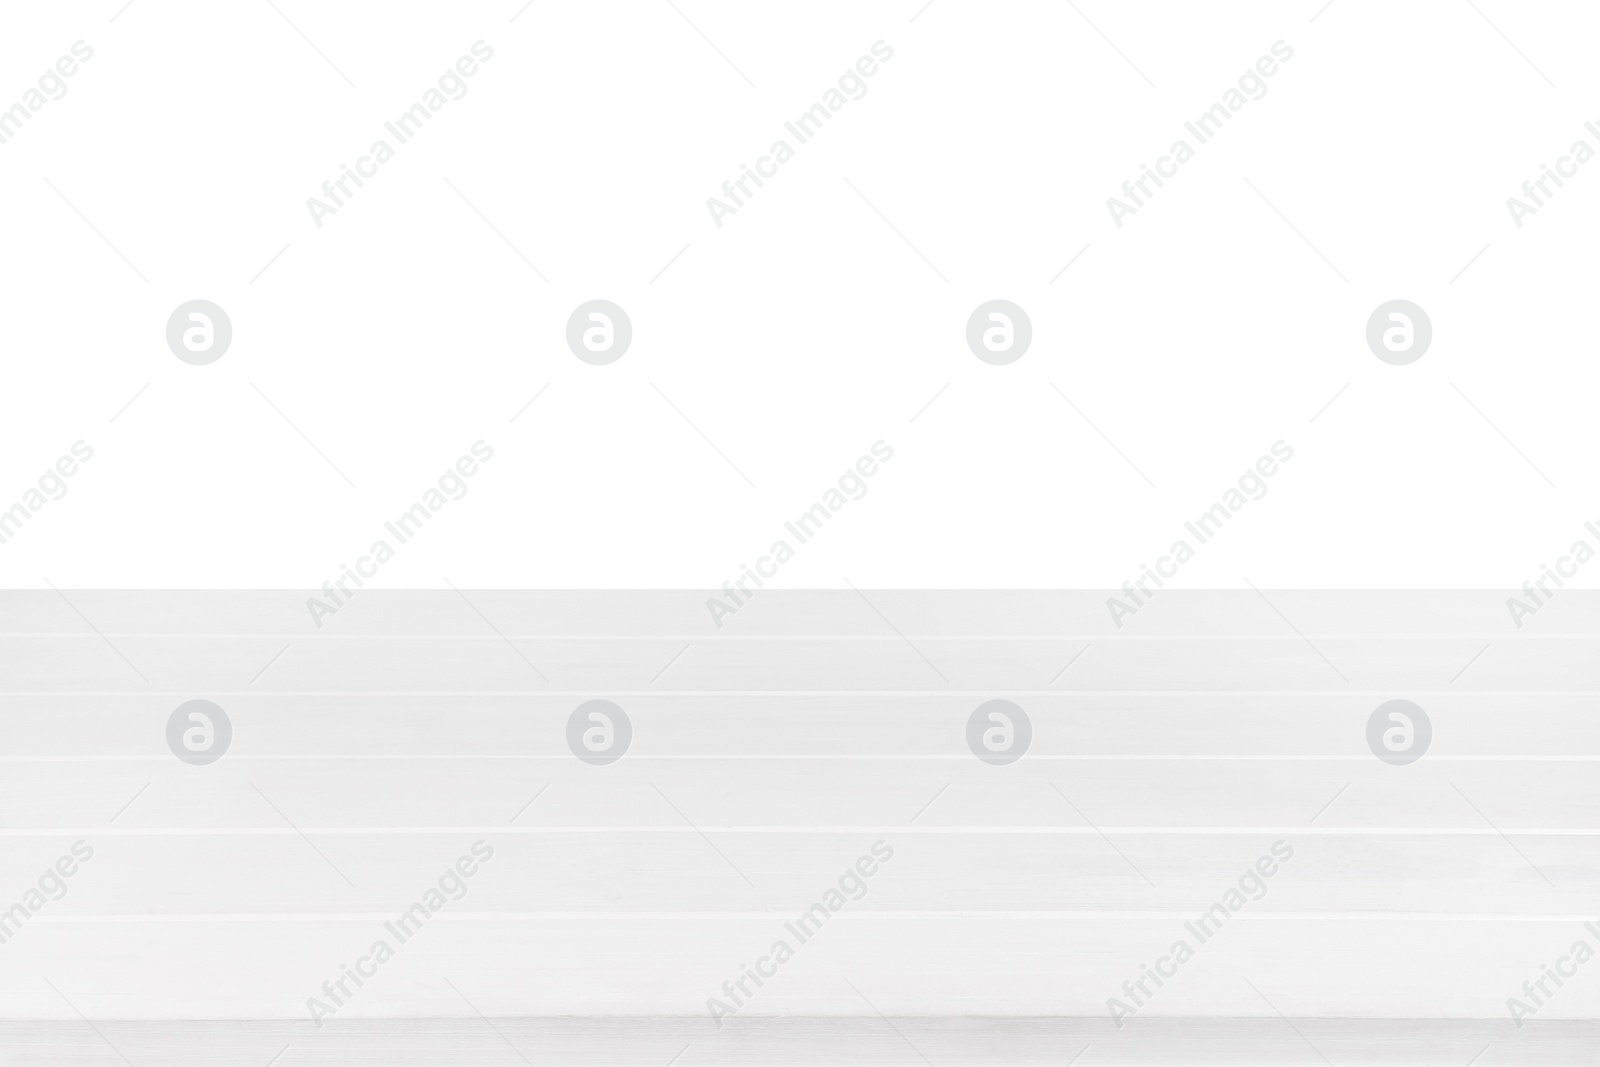 Photo of Empty clean wooden surface isolated on white